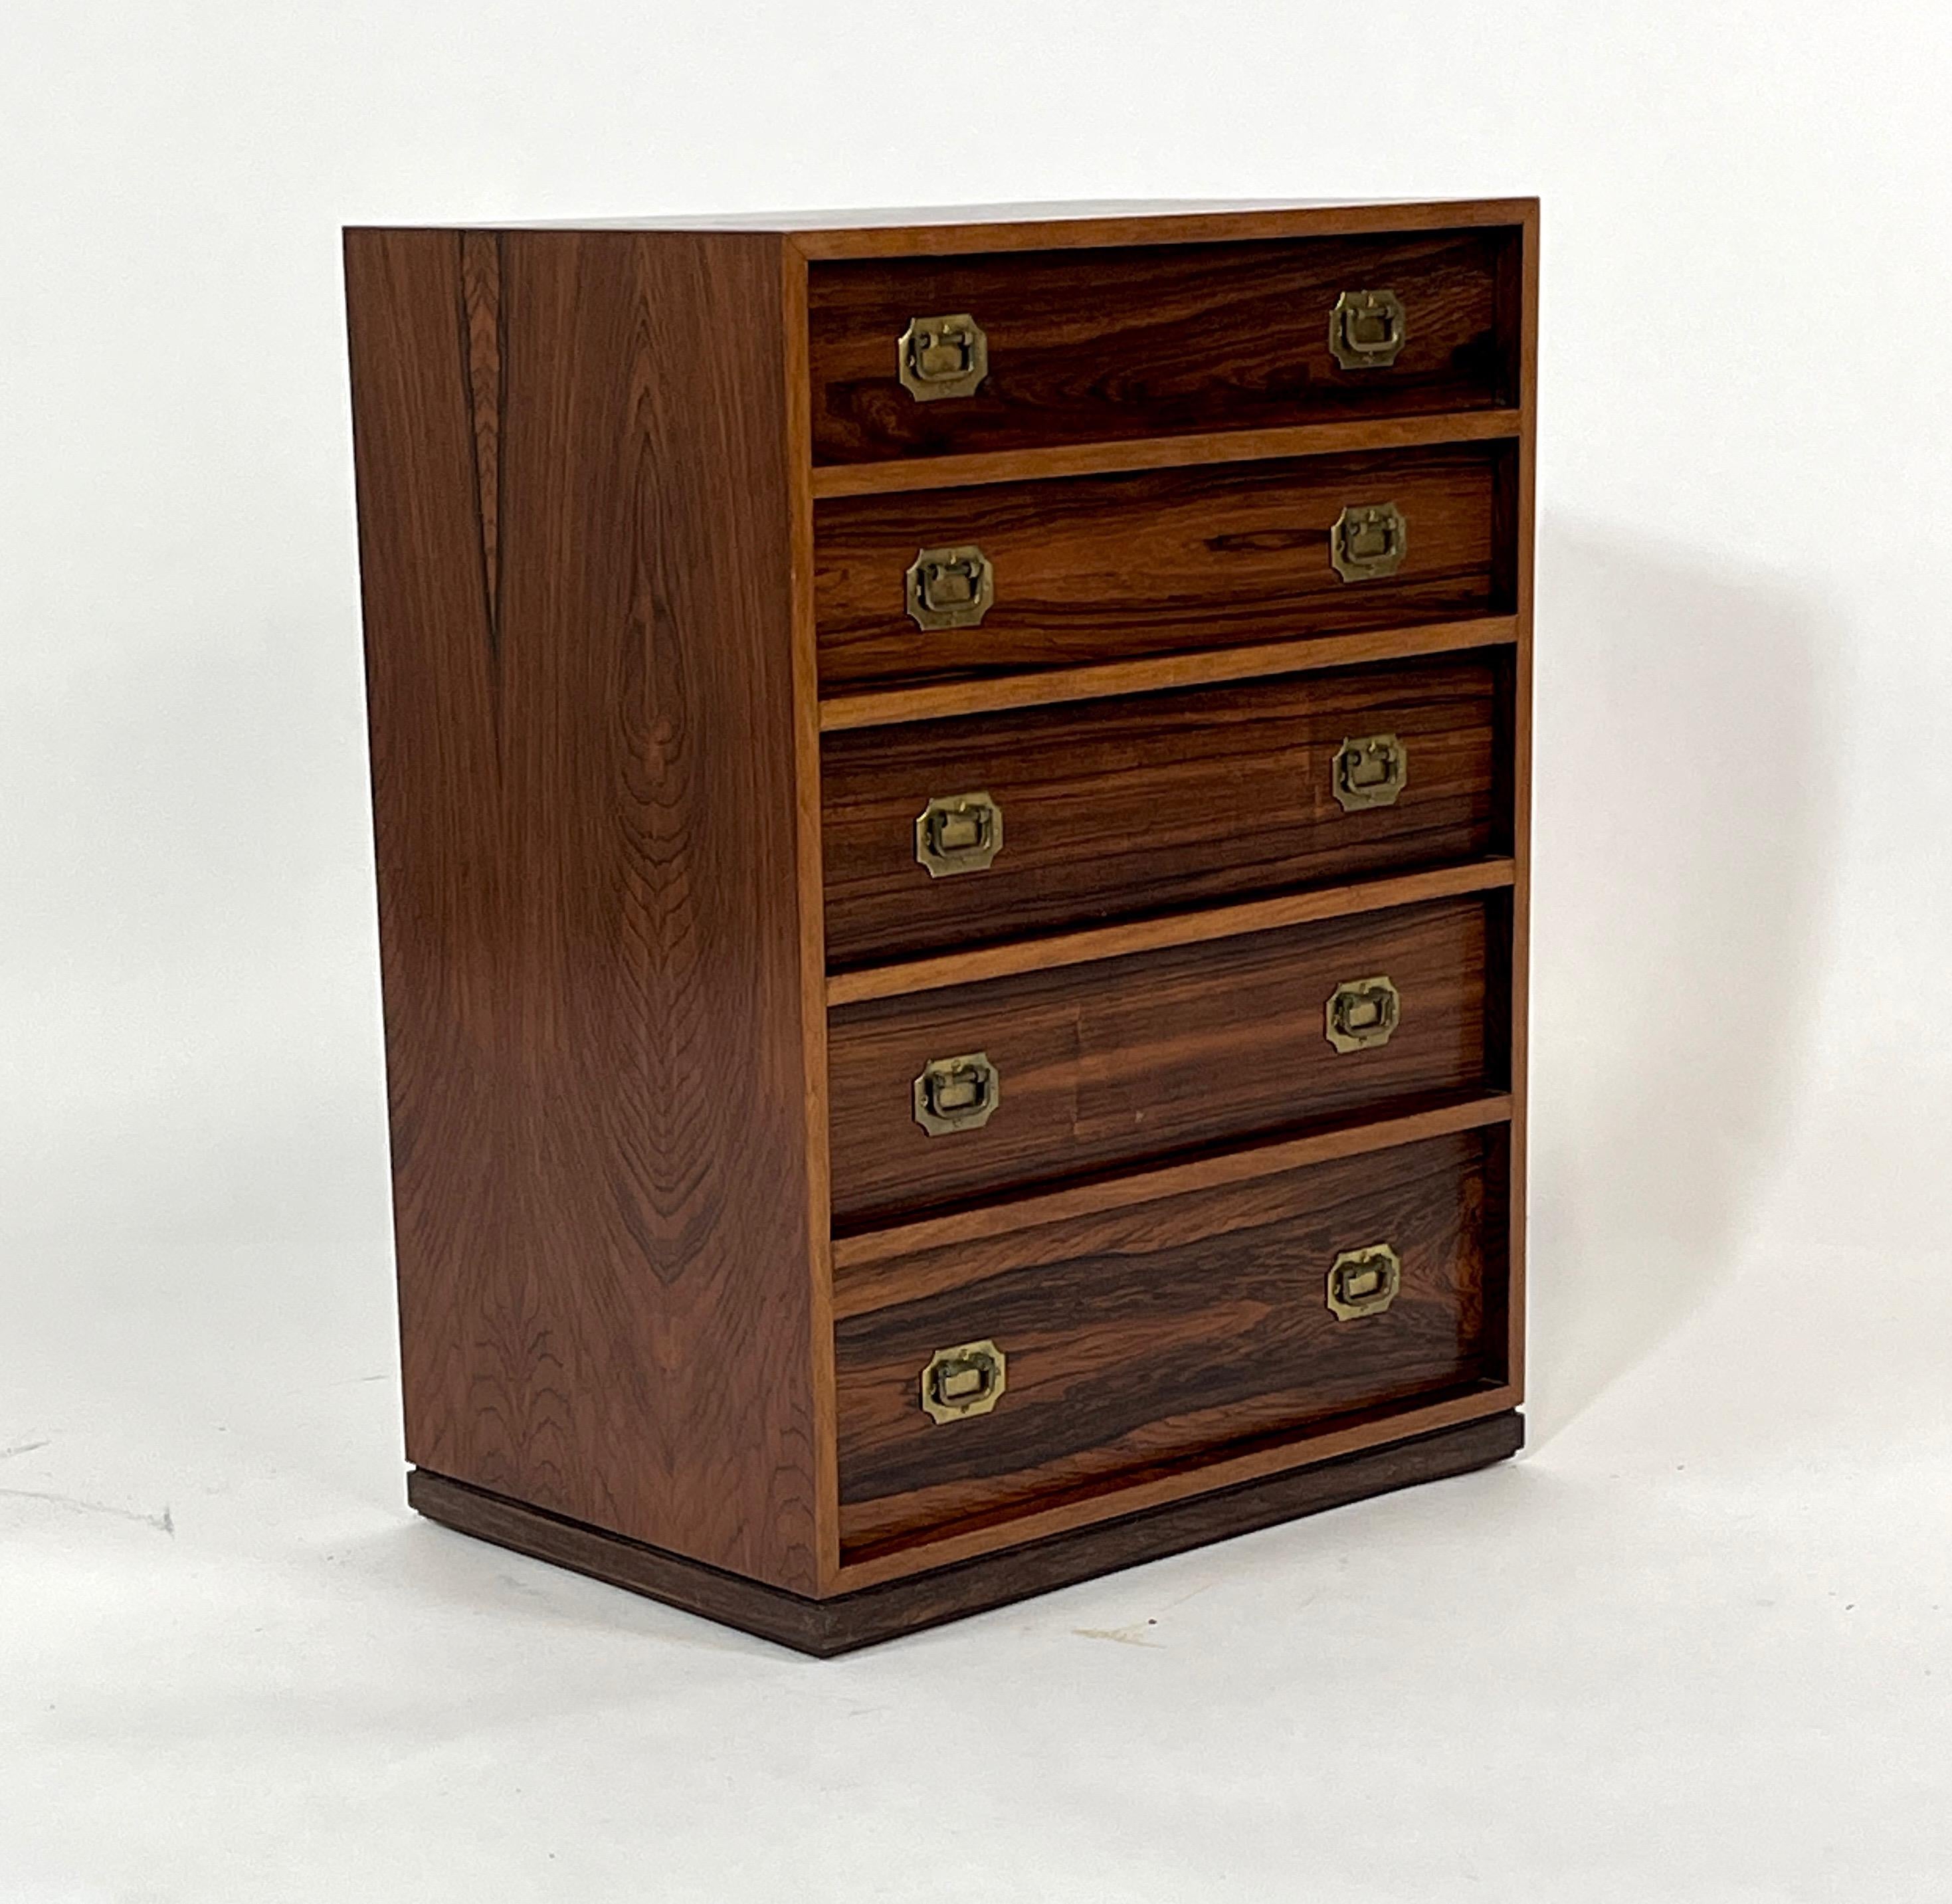 Scandinavian Modern Henning Korch Rosewood Campaign Jewelry Chest of Drawers from Denmark